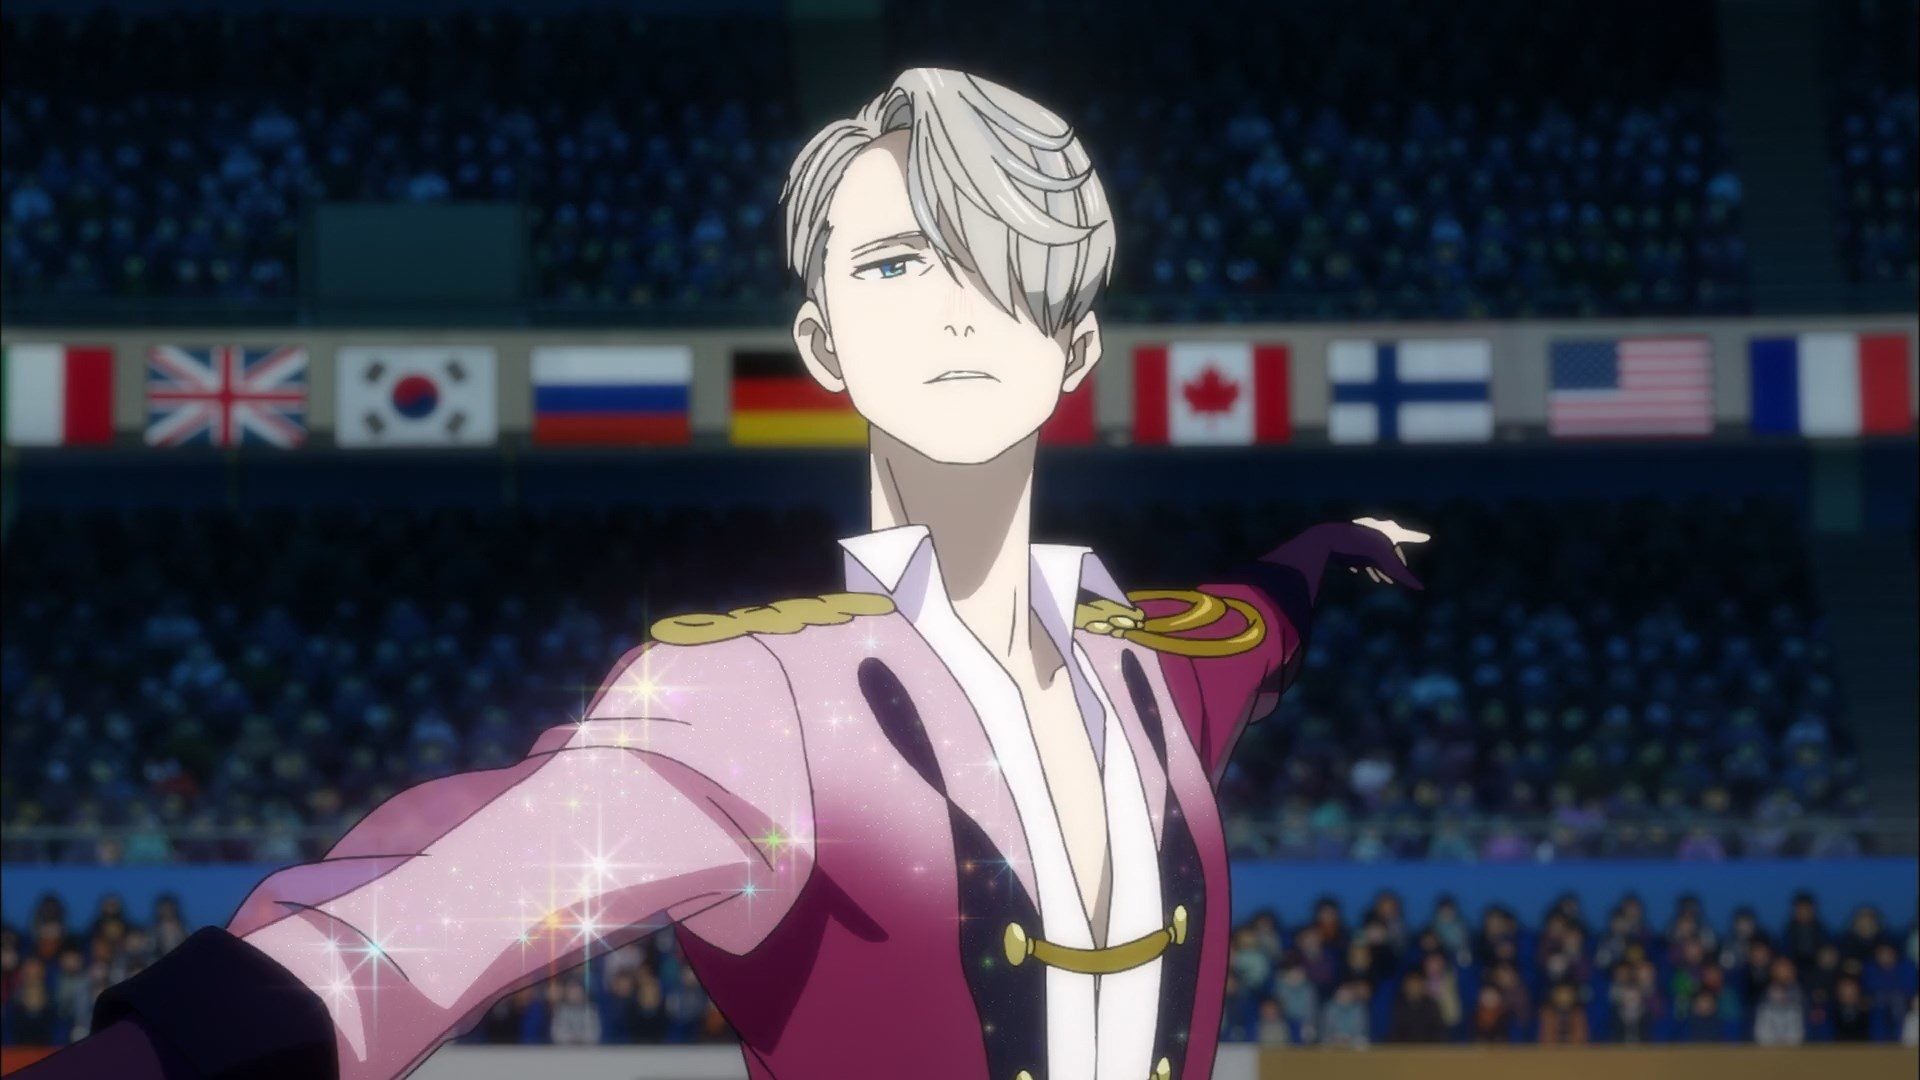 Yuri On Ice Wallpaper ① Download Free Stunning Backgrounds For